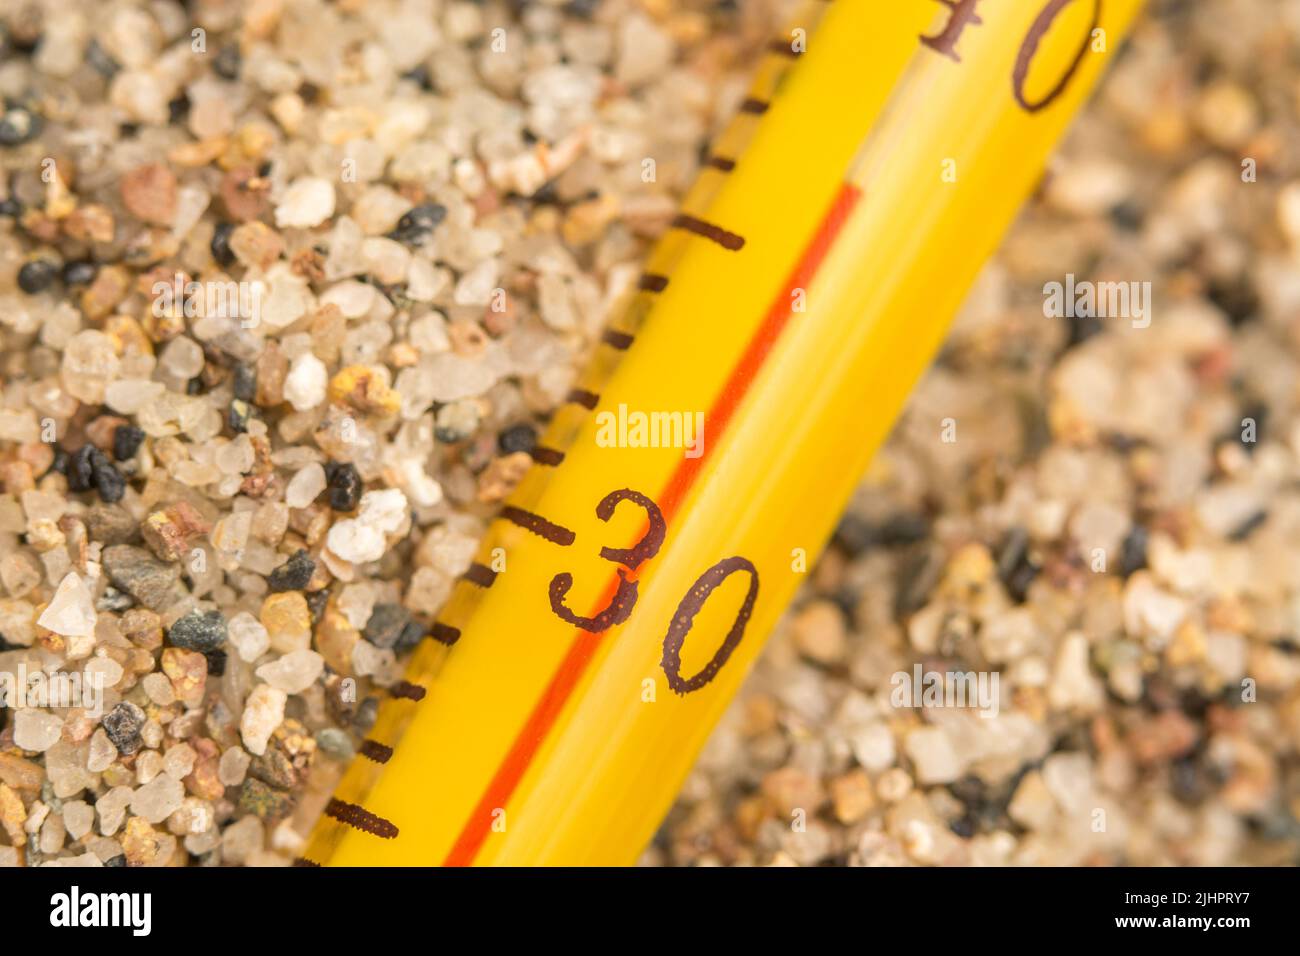 Close-up glass alcohol thermometer on coarse sand, reading 36 C. For 2022 Summer heatwave, UK heatwave, hot weather, high temperatures, severe heat Stock Photo